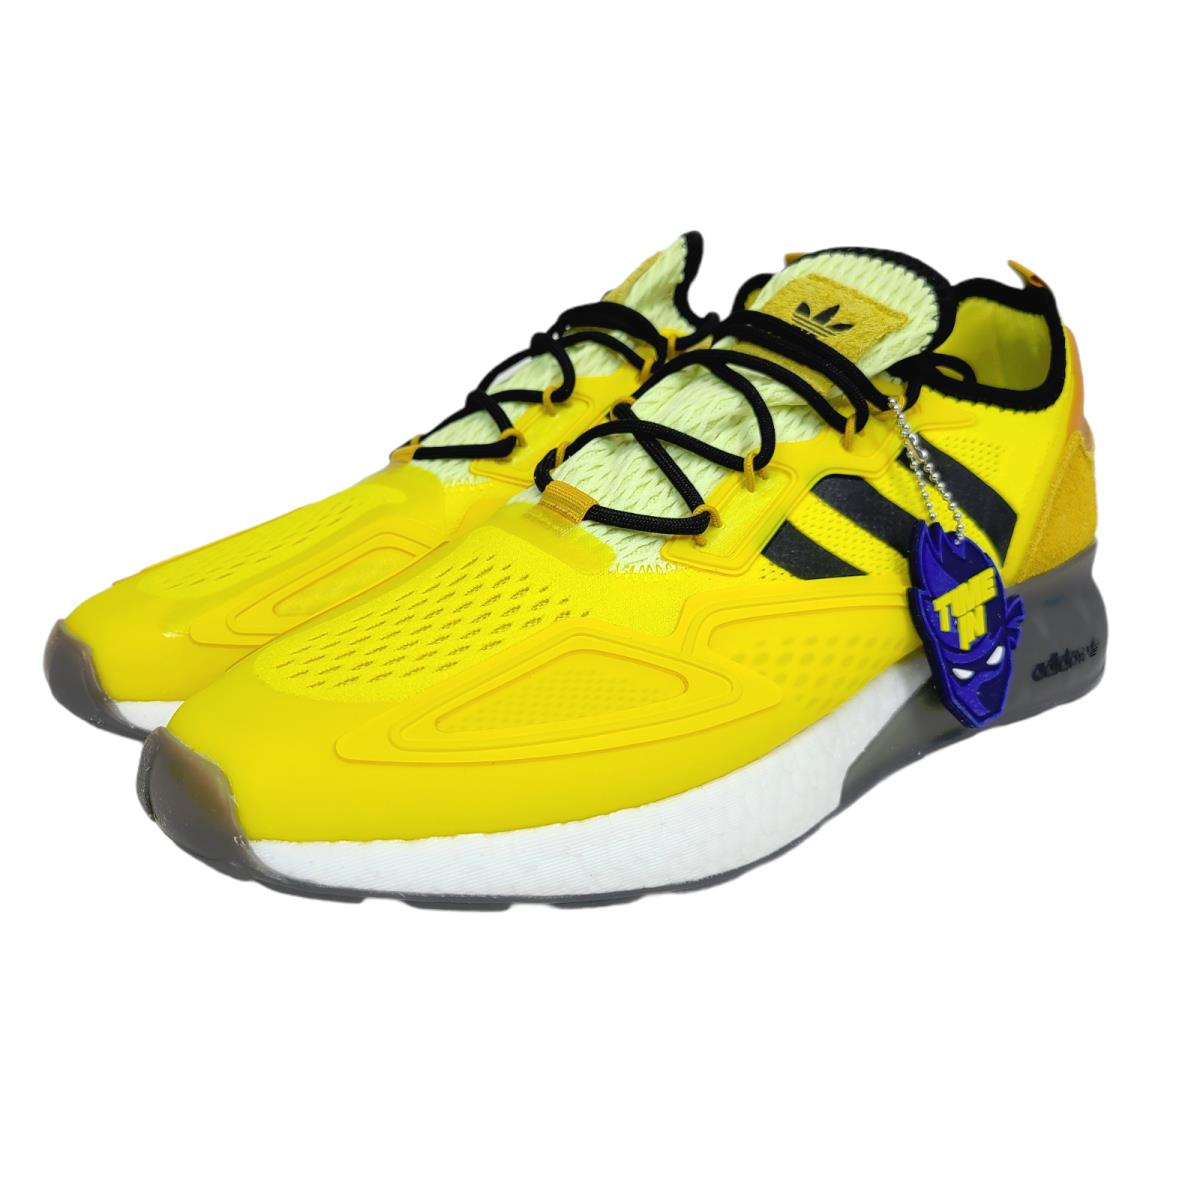 Adidas shoes Boost - Yellow 1